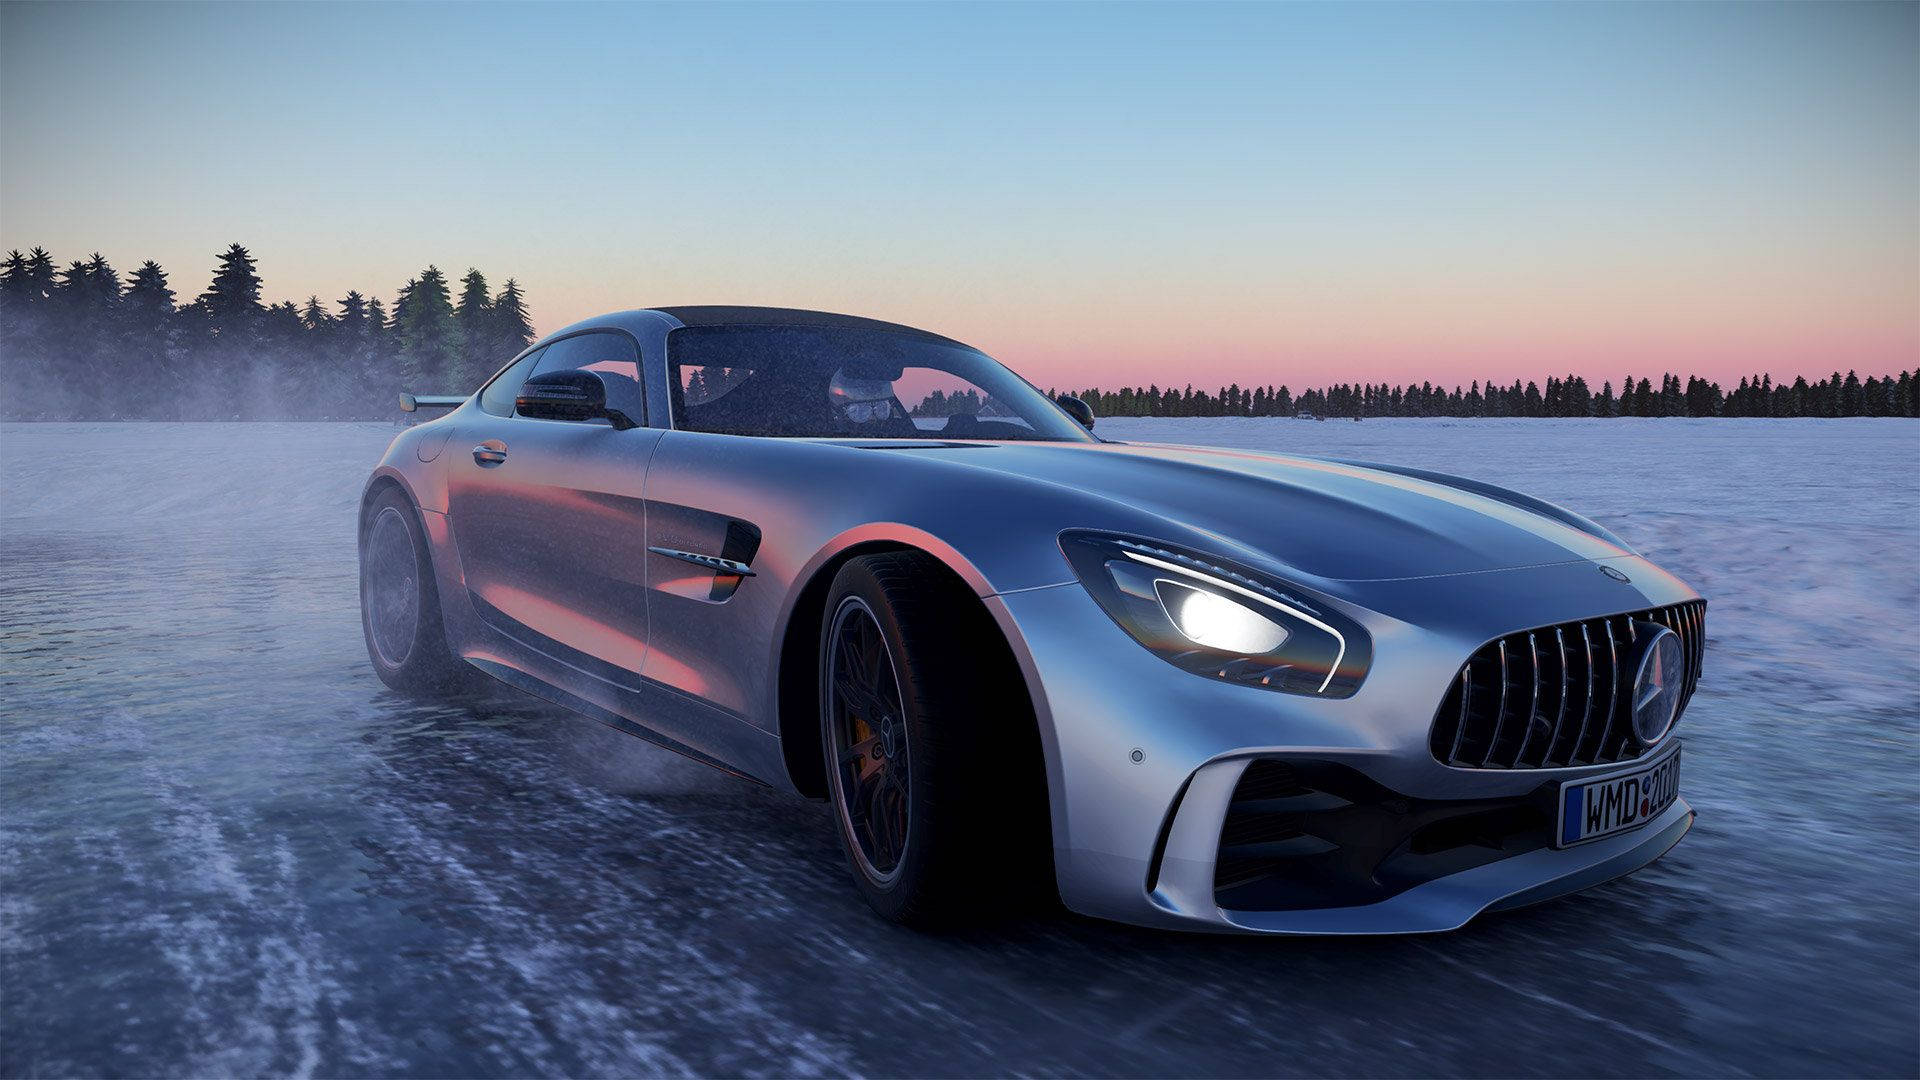 Titanium Mercedes-benz In Action - Project Cars 2 Background